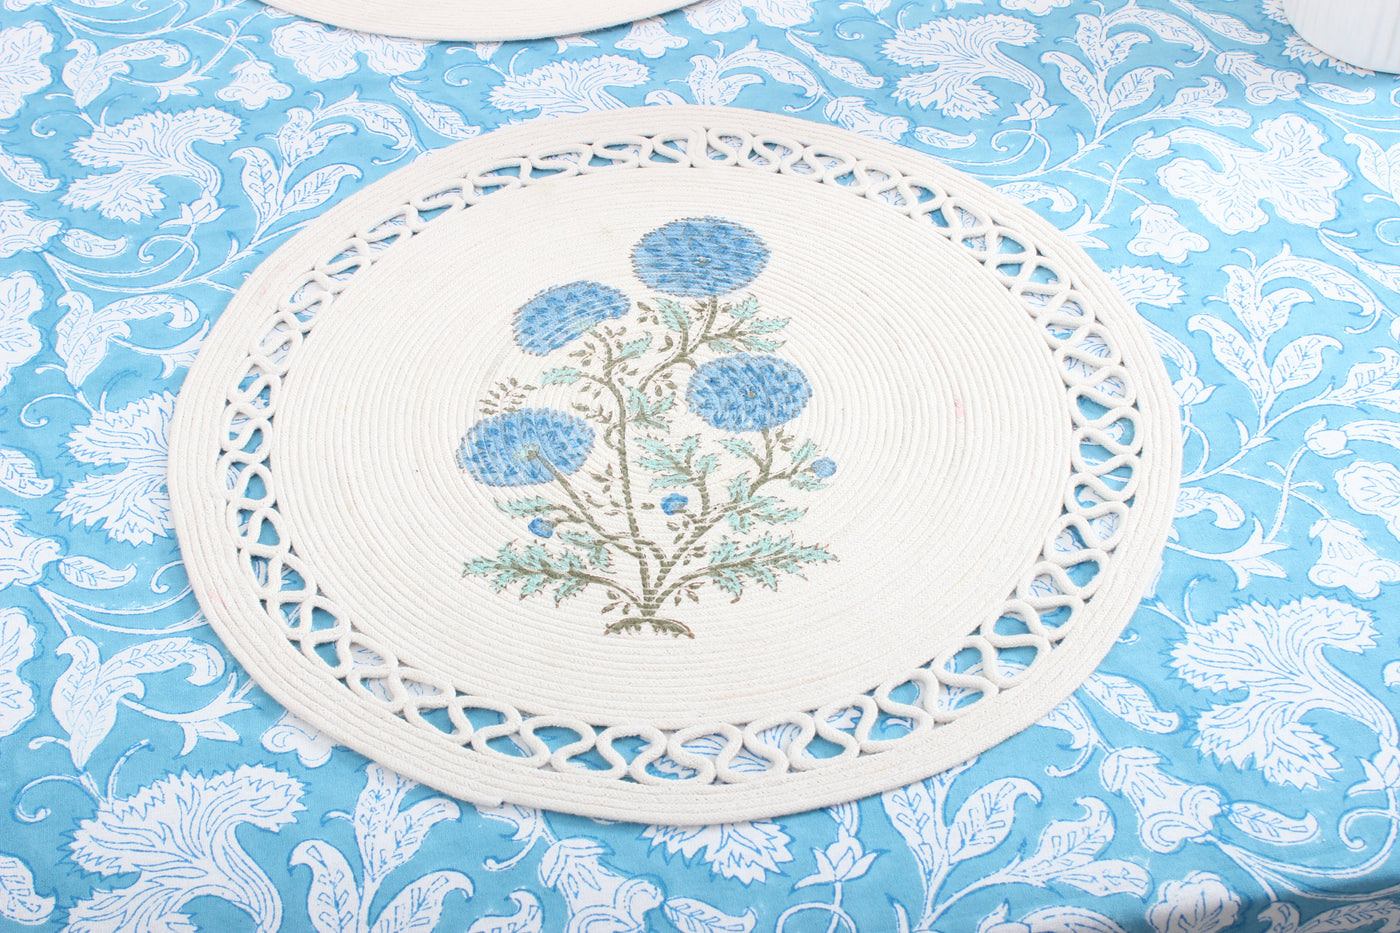 Fabricrush Turkish and Magic Blue Indian Floral Hand Block Printed Cotton Cloth Tablecloth Table Cover, Farmhouse Wedding Events House Party Restaurant